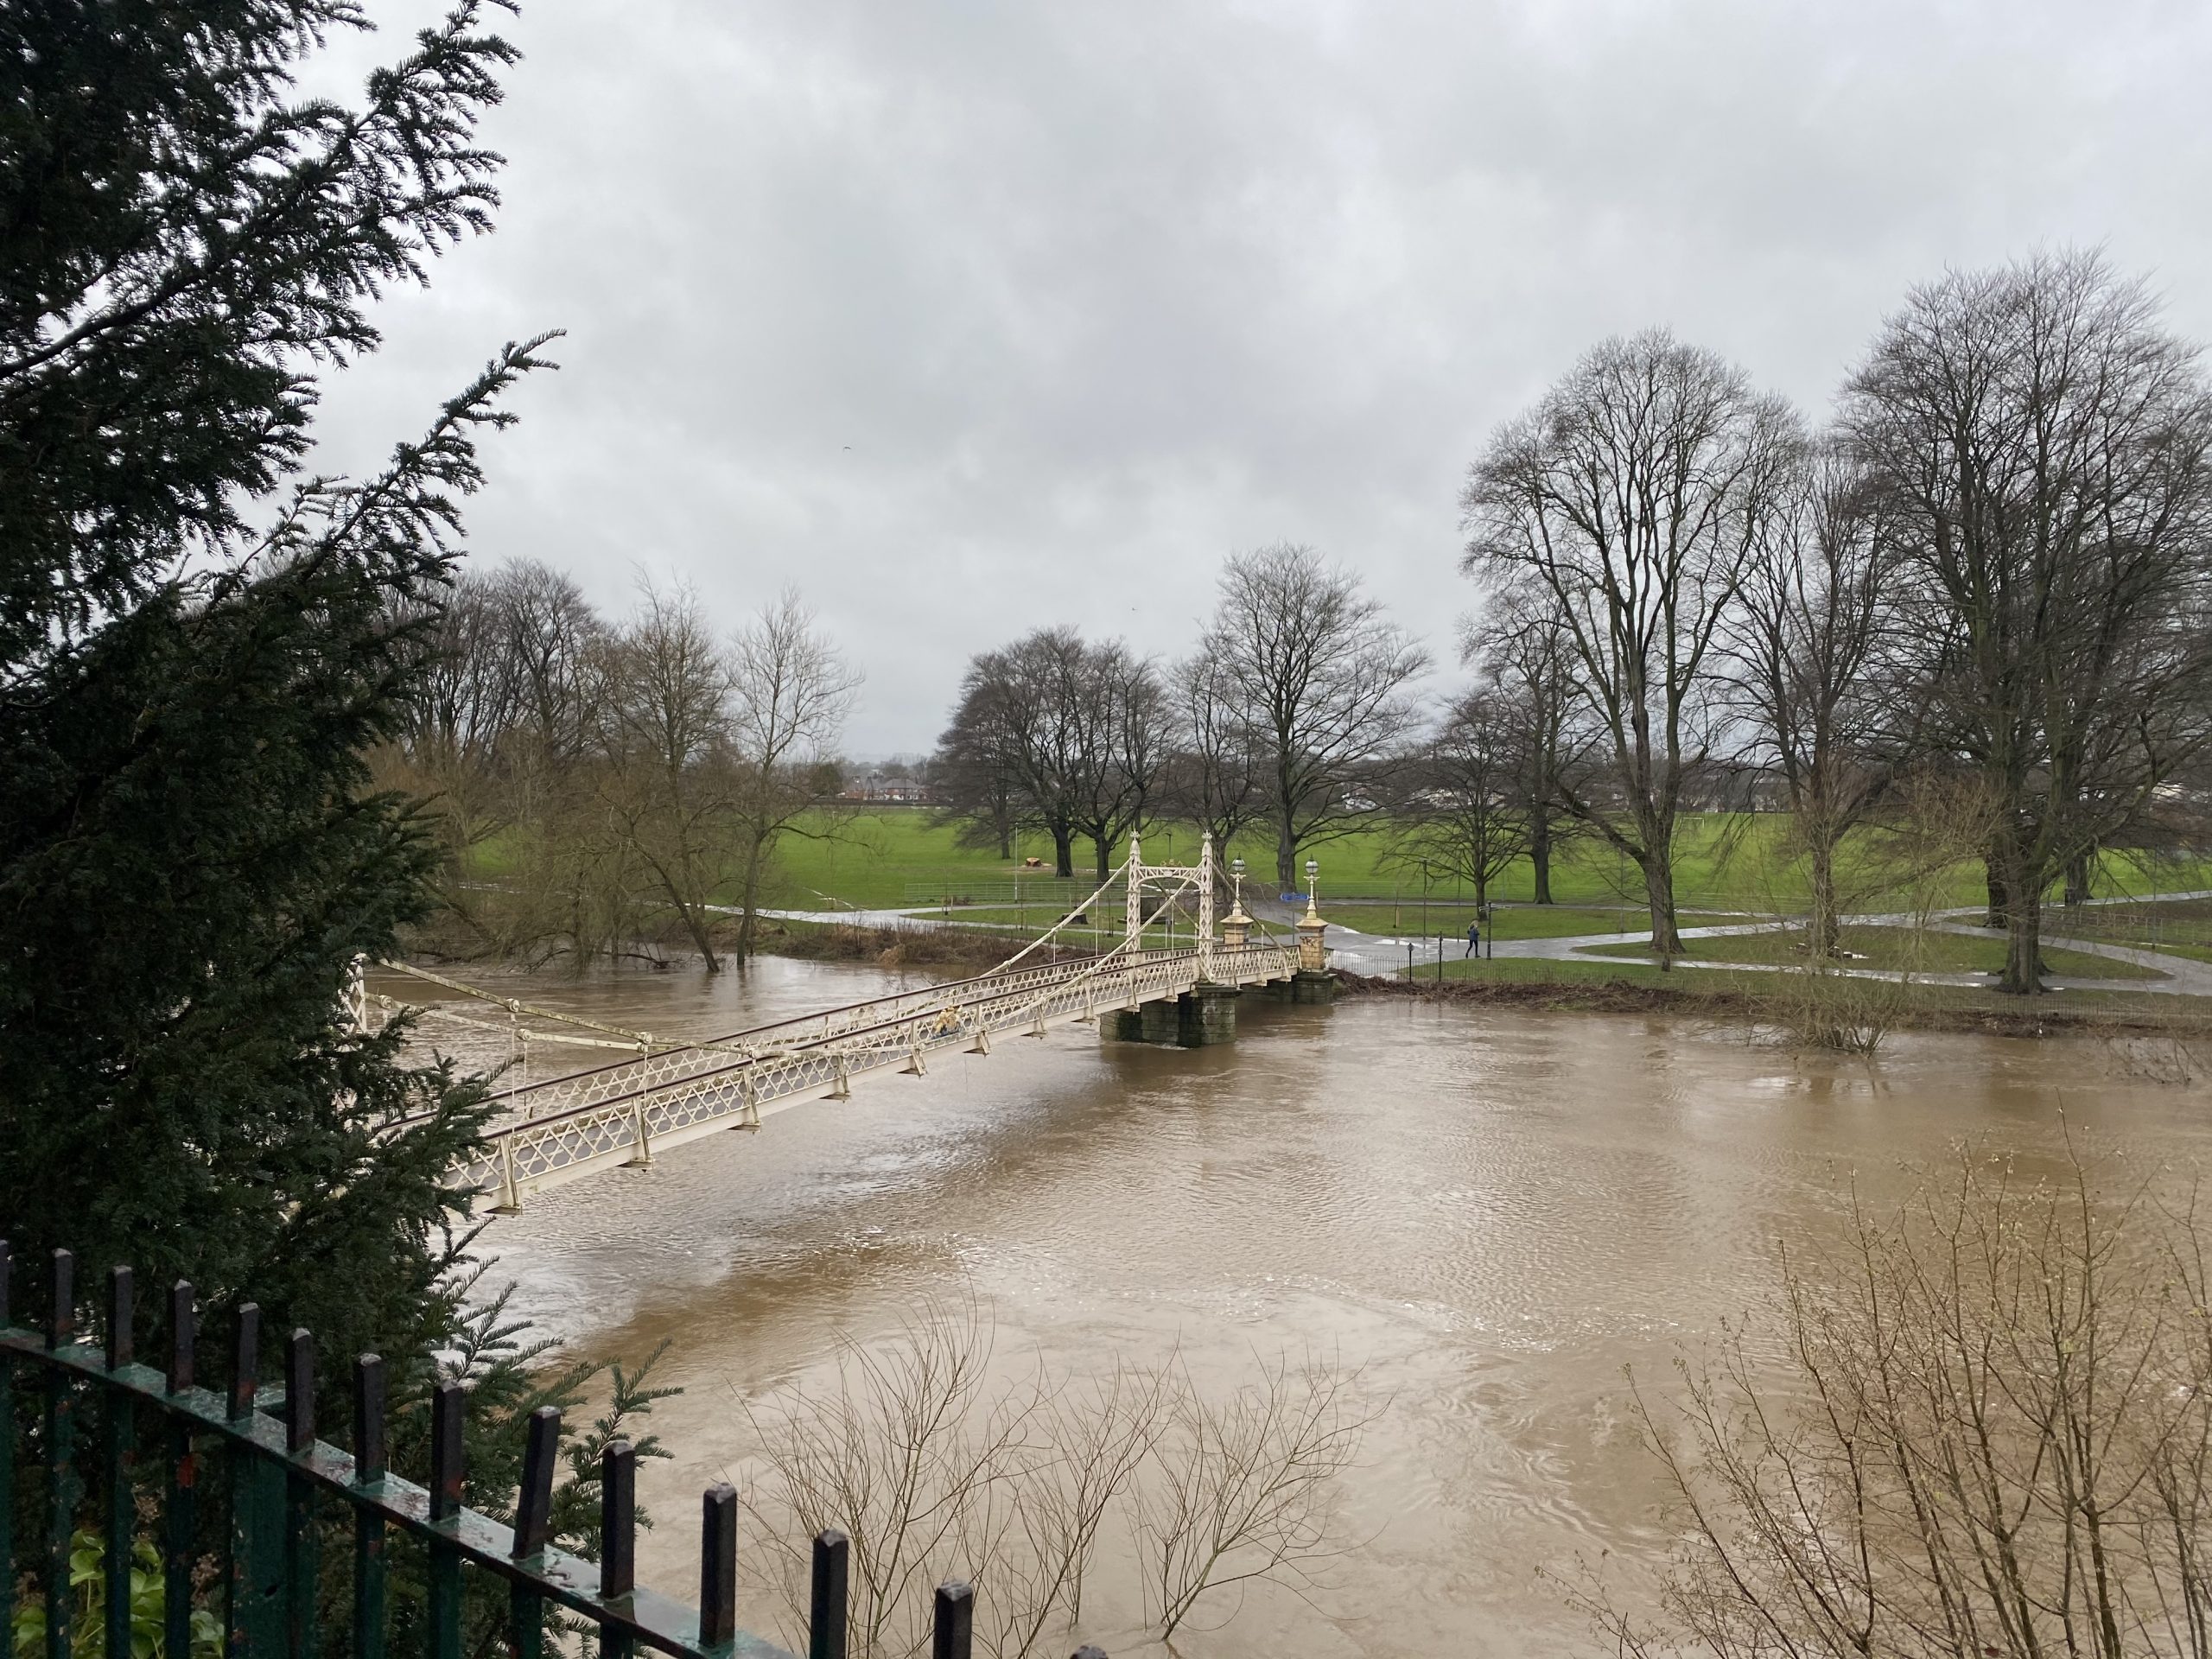 FLOODING | River Wye could peak at 5.5 metres in Hereford